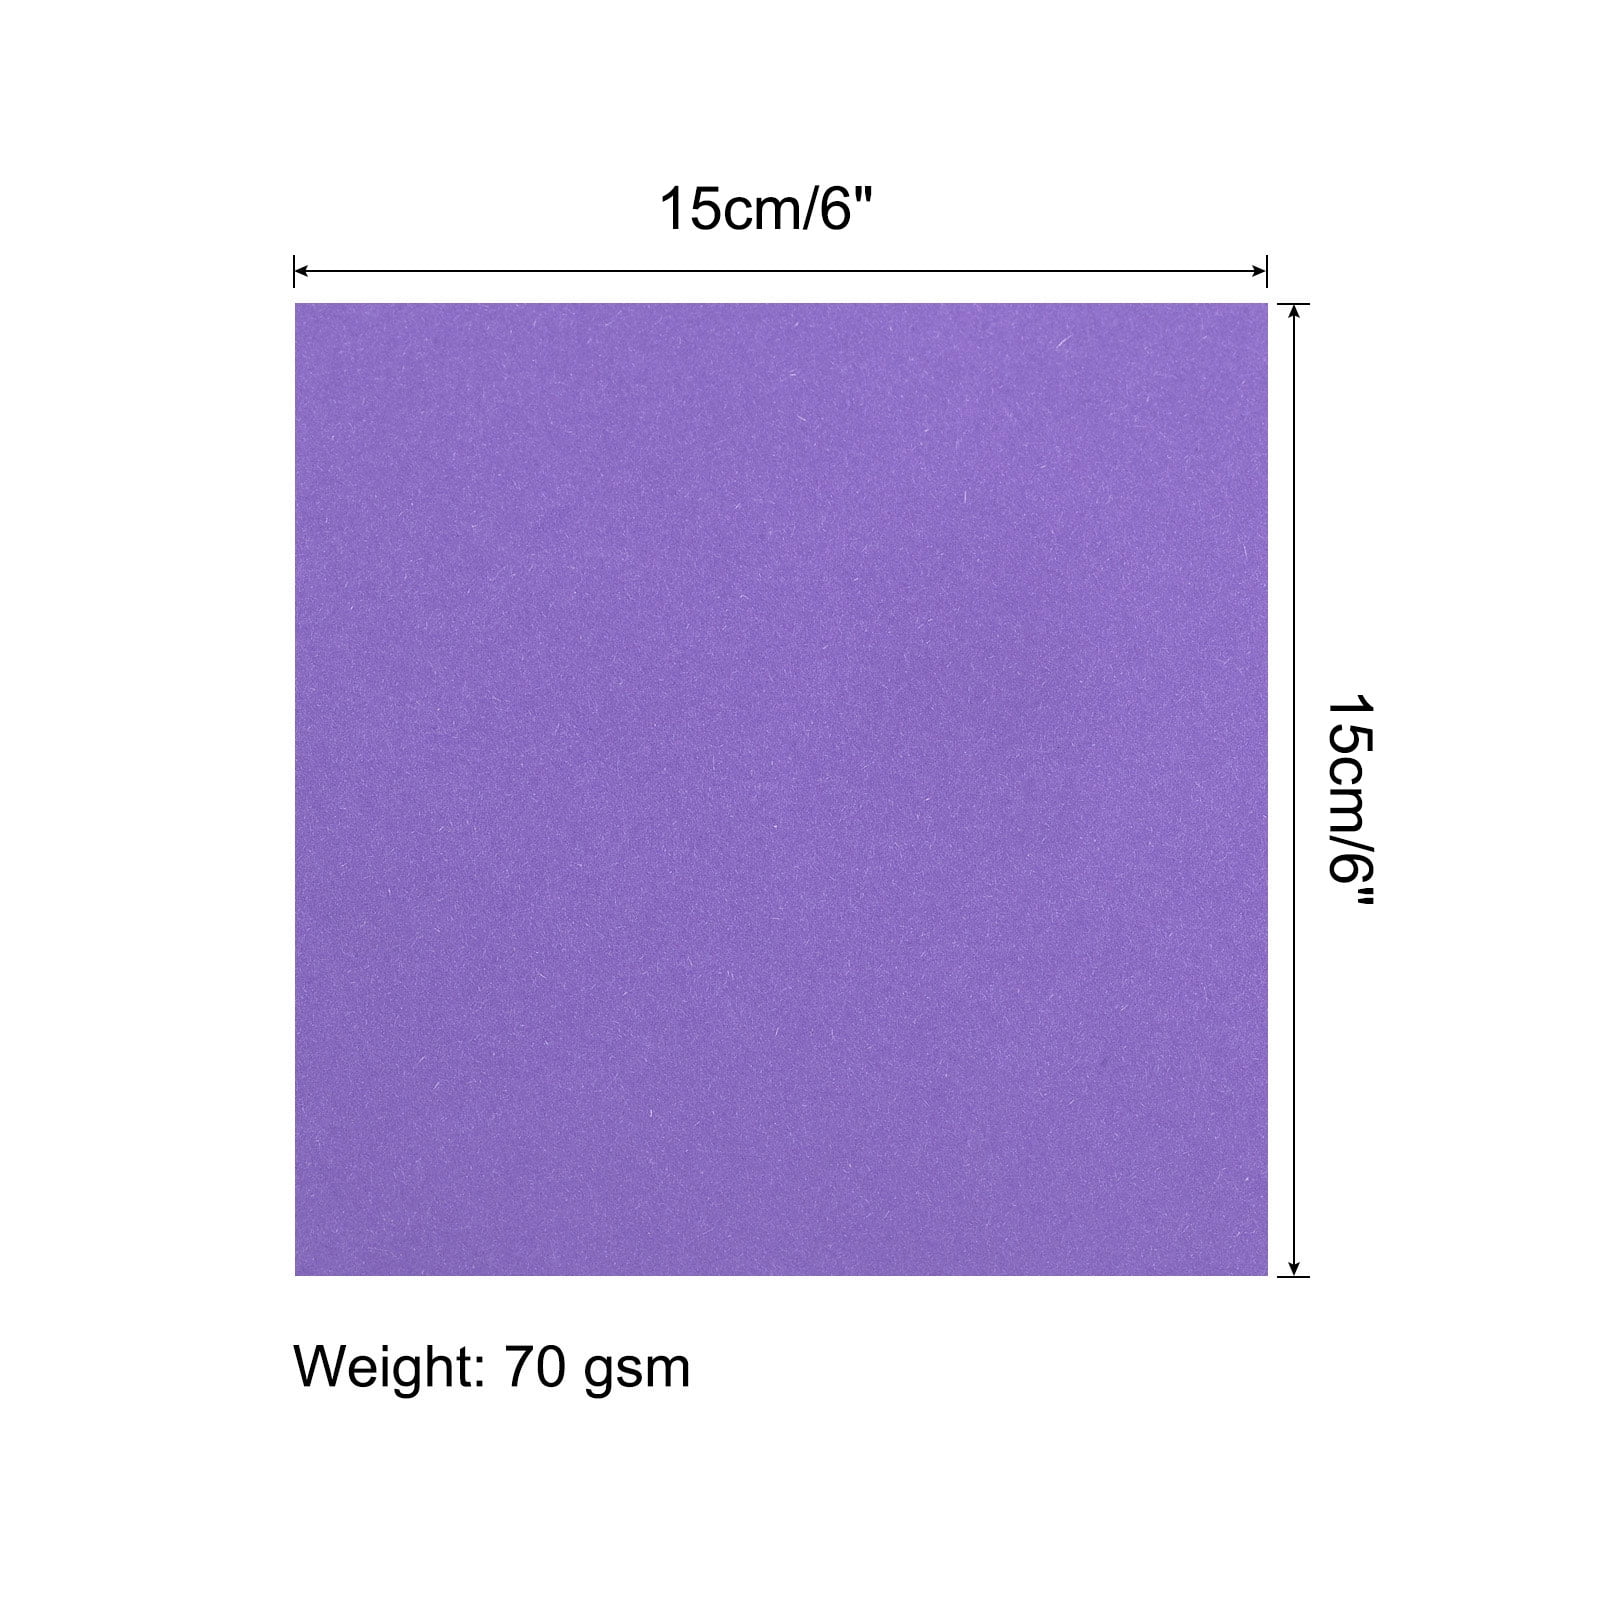 MECCANIXITY 50 Sheets Origami Paper Double Sided Light Purple 6x6 Inch  Square Sheet for Art Craft Project, Beginners, Gifts Decor